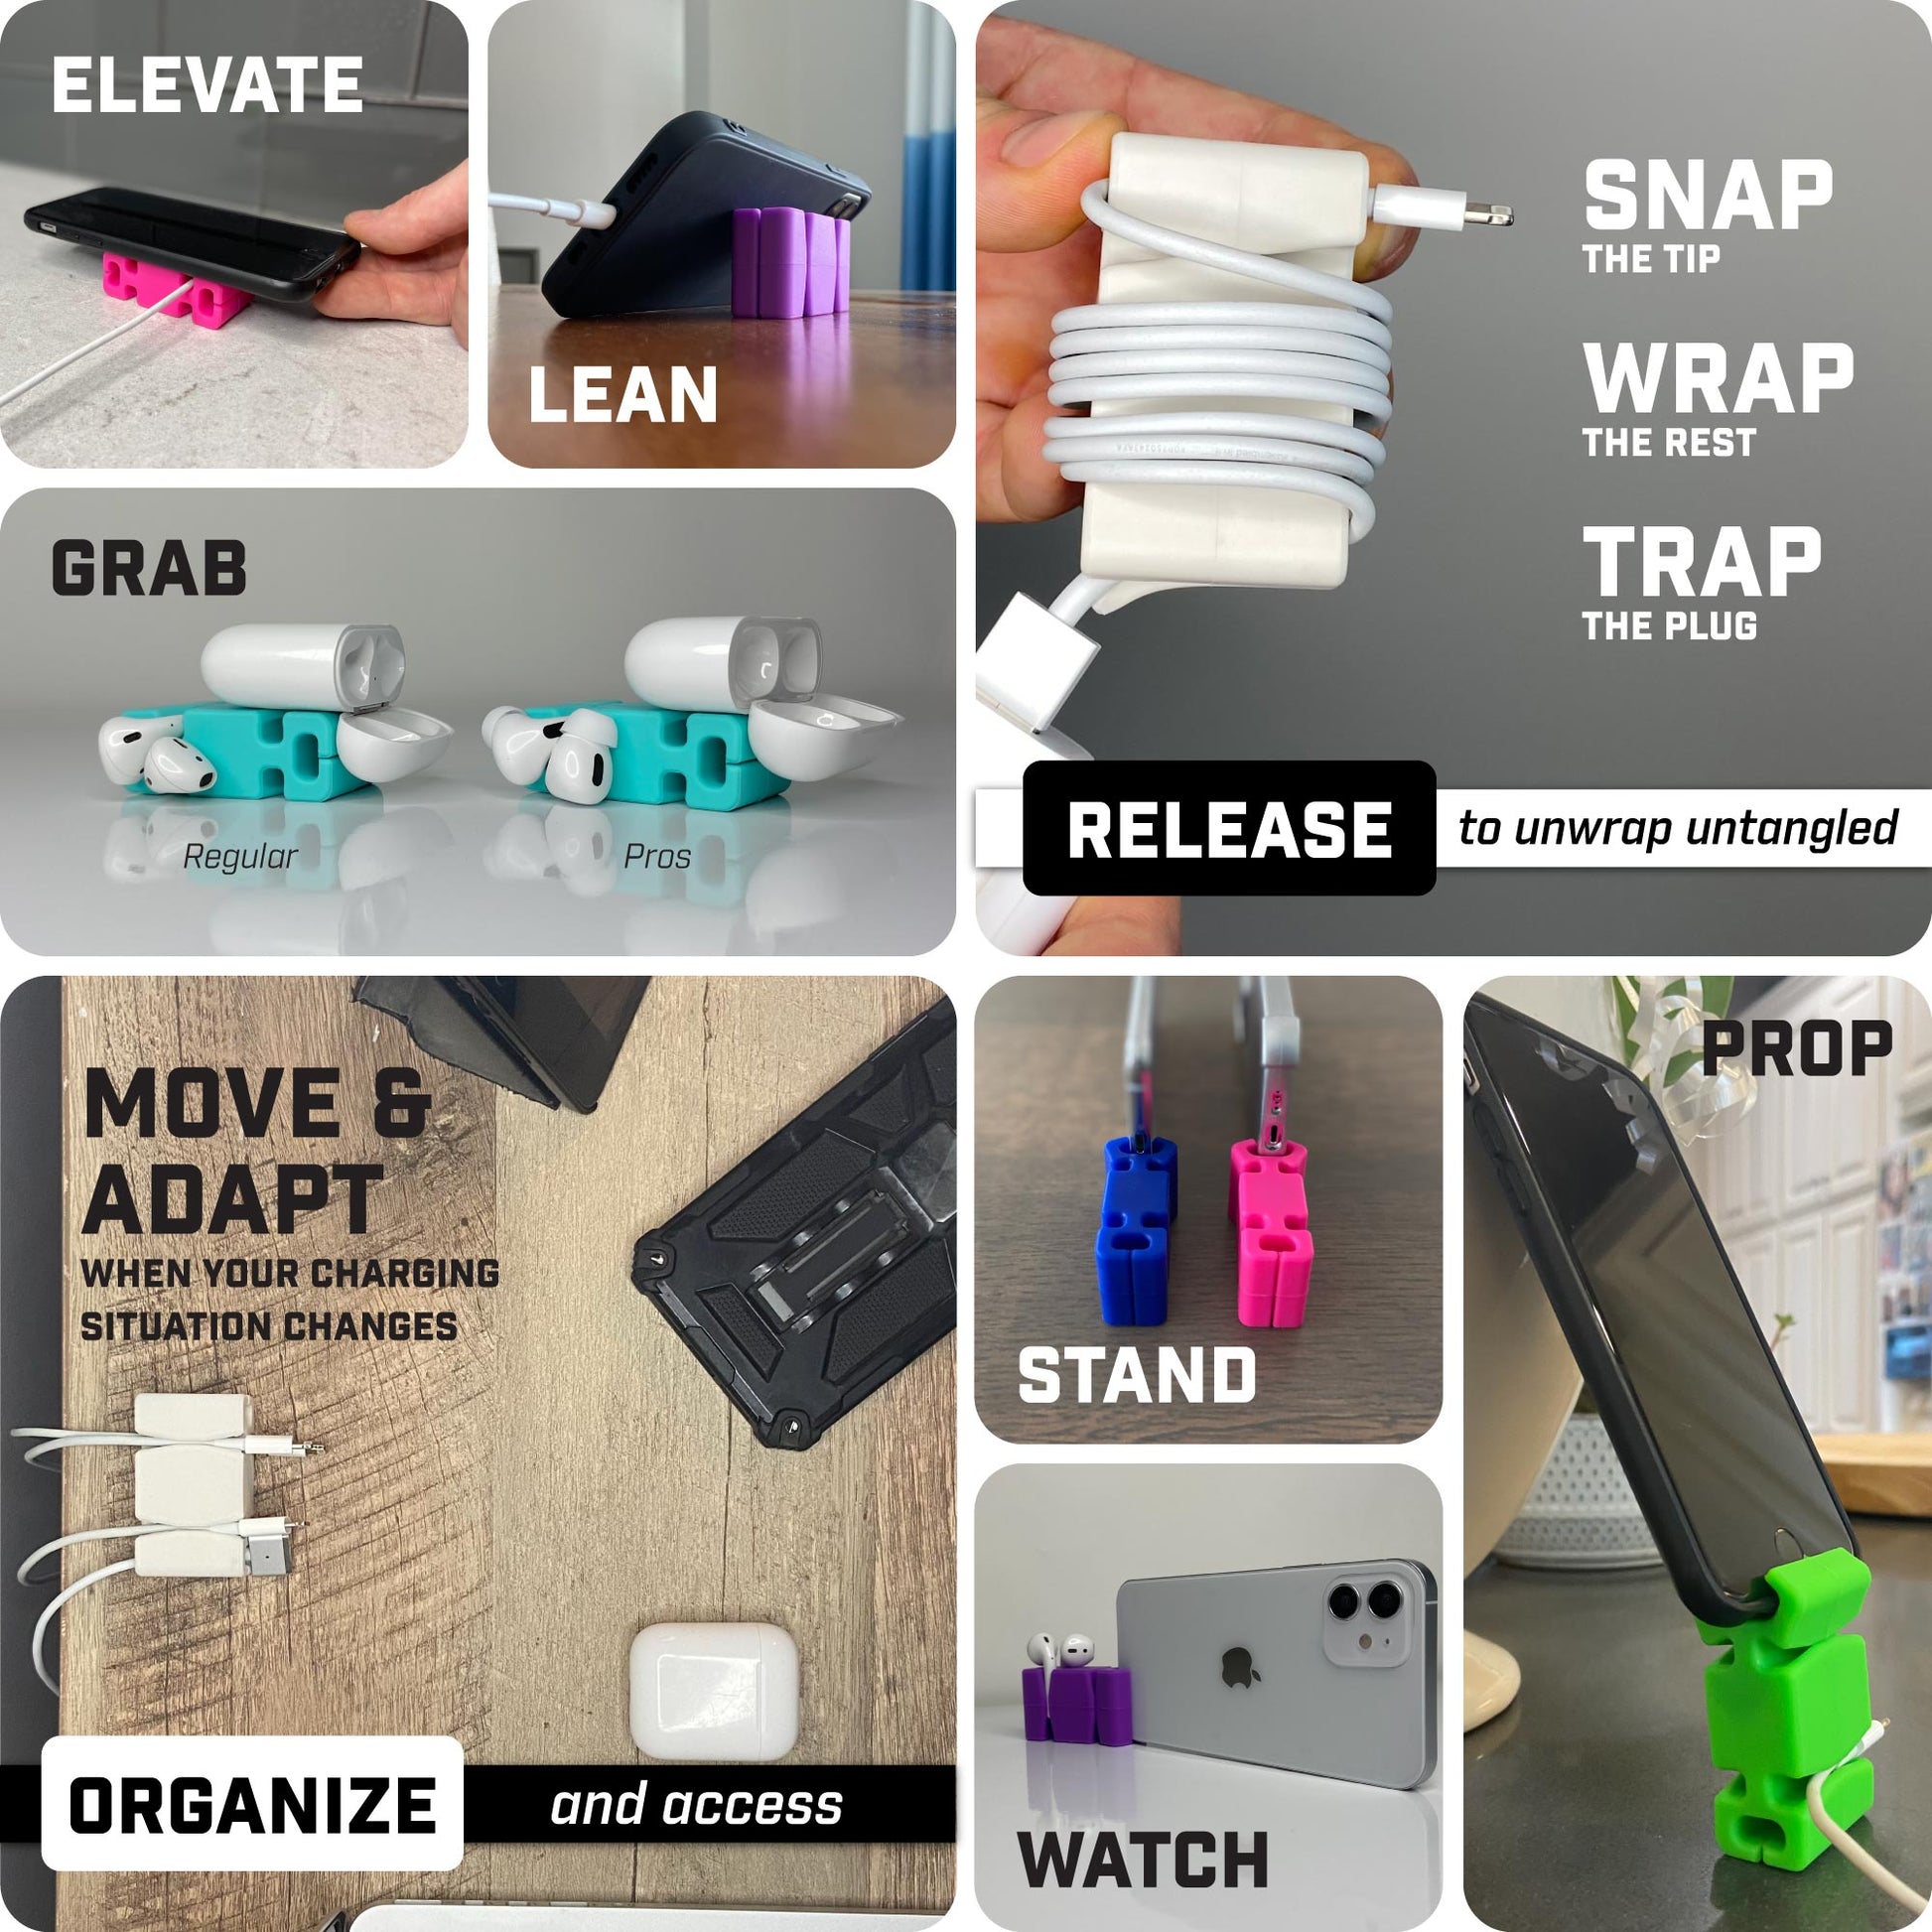 CordBrick's Uses as a Phone Accessory and AirPod Holder: it Elevates Phones for Lifting, Leans Phones, Stands and Props Phones, and can Grab AirPods & AirPods Pro. Snap, Wrap, Trap to Unwrap Untangled and Move & Adapt to Reorganize